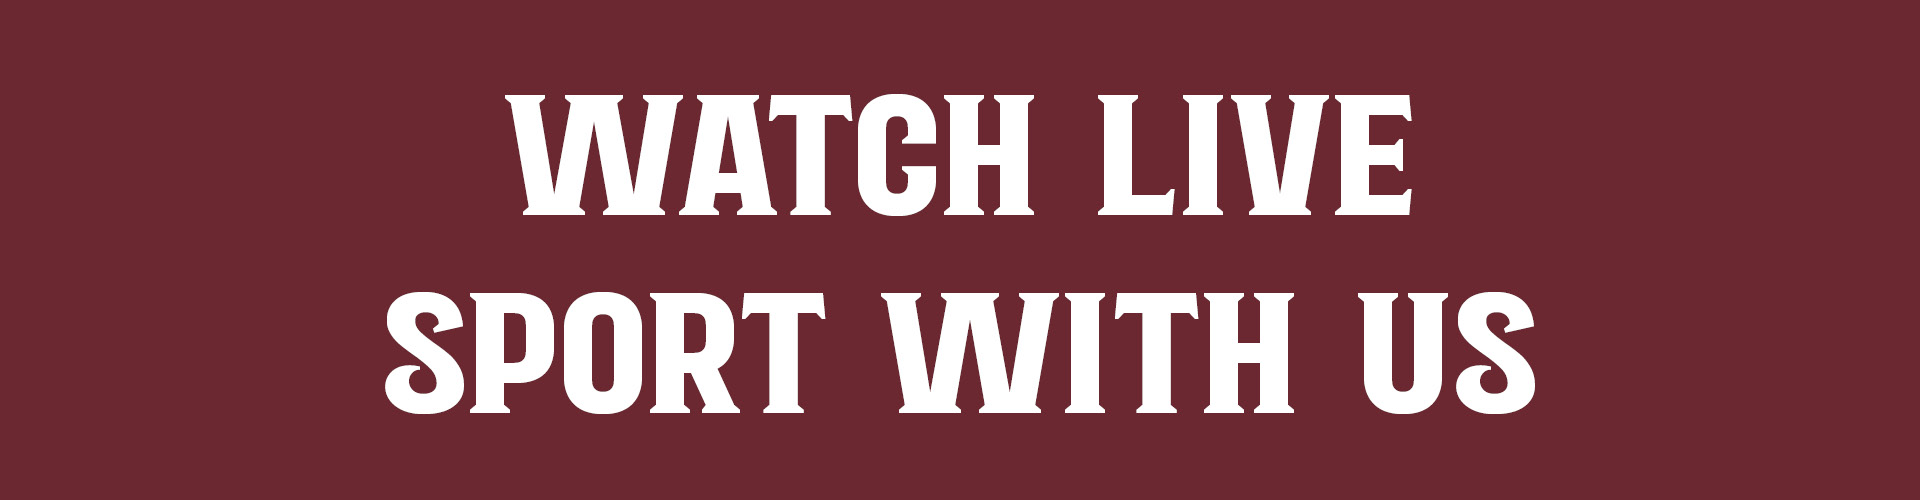 Watch live sport in Eastleigh at The Station pub